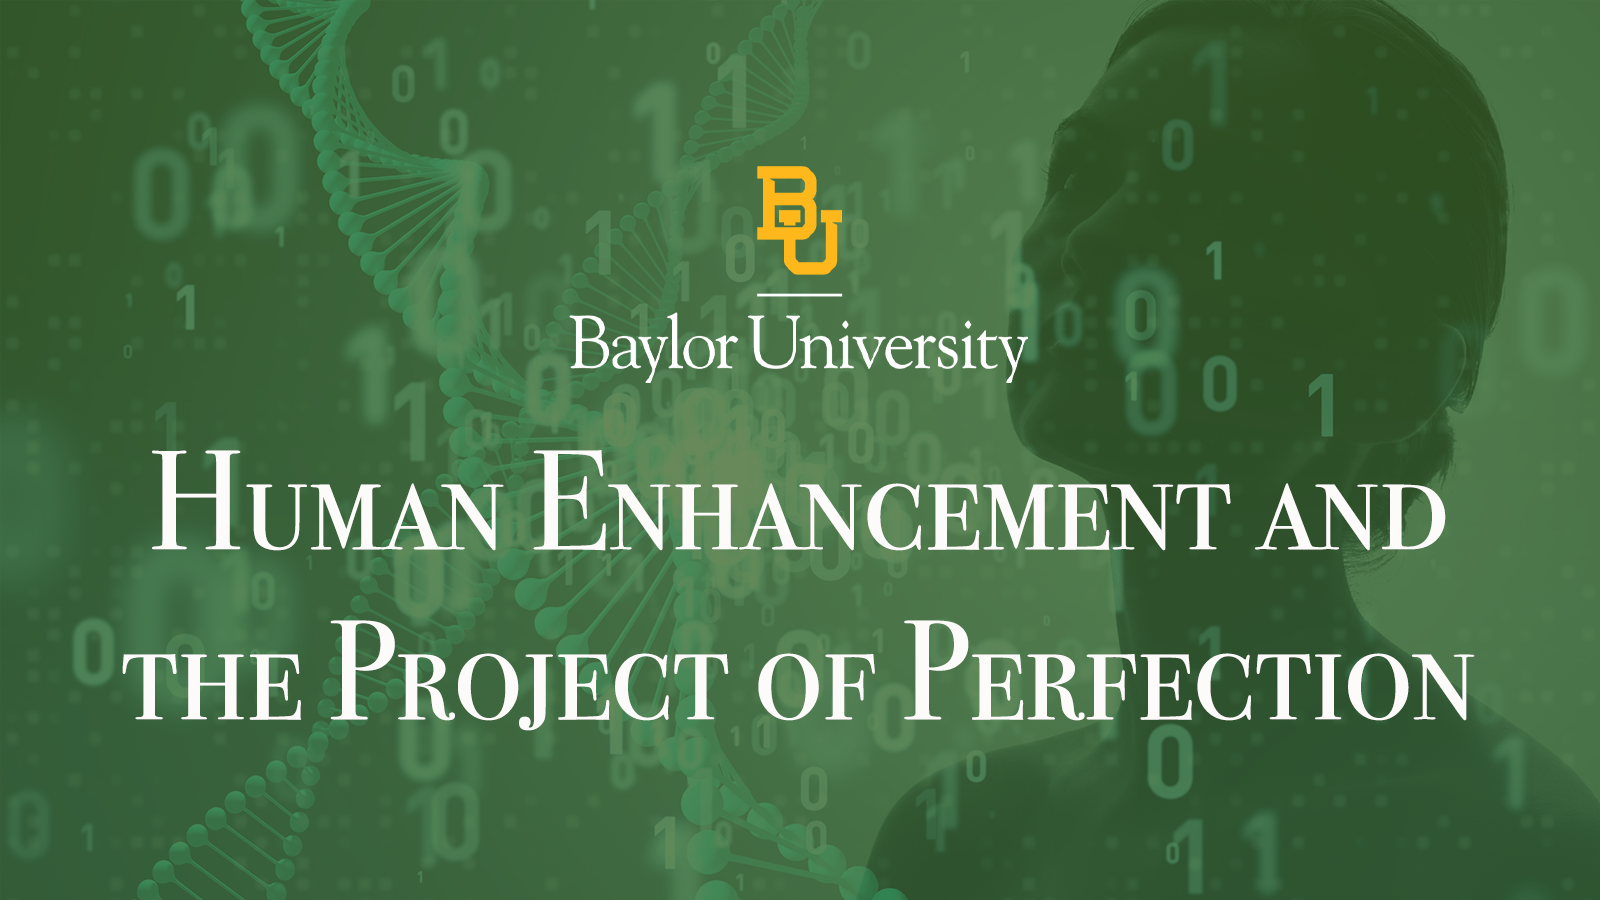 Human Enhancement and the Project of Perfection